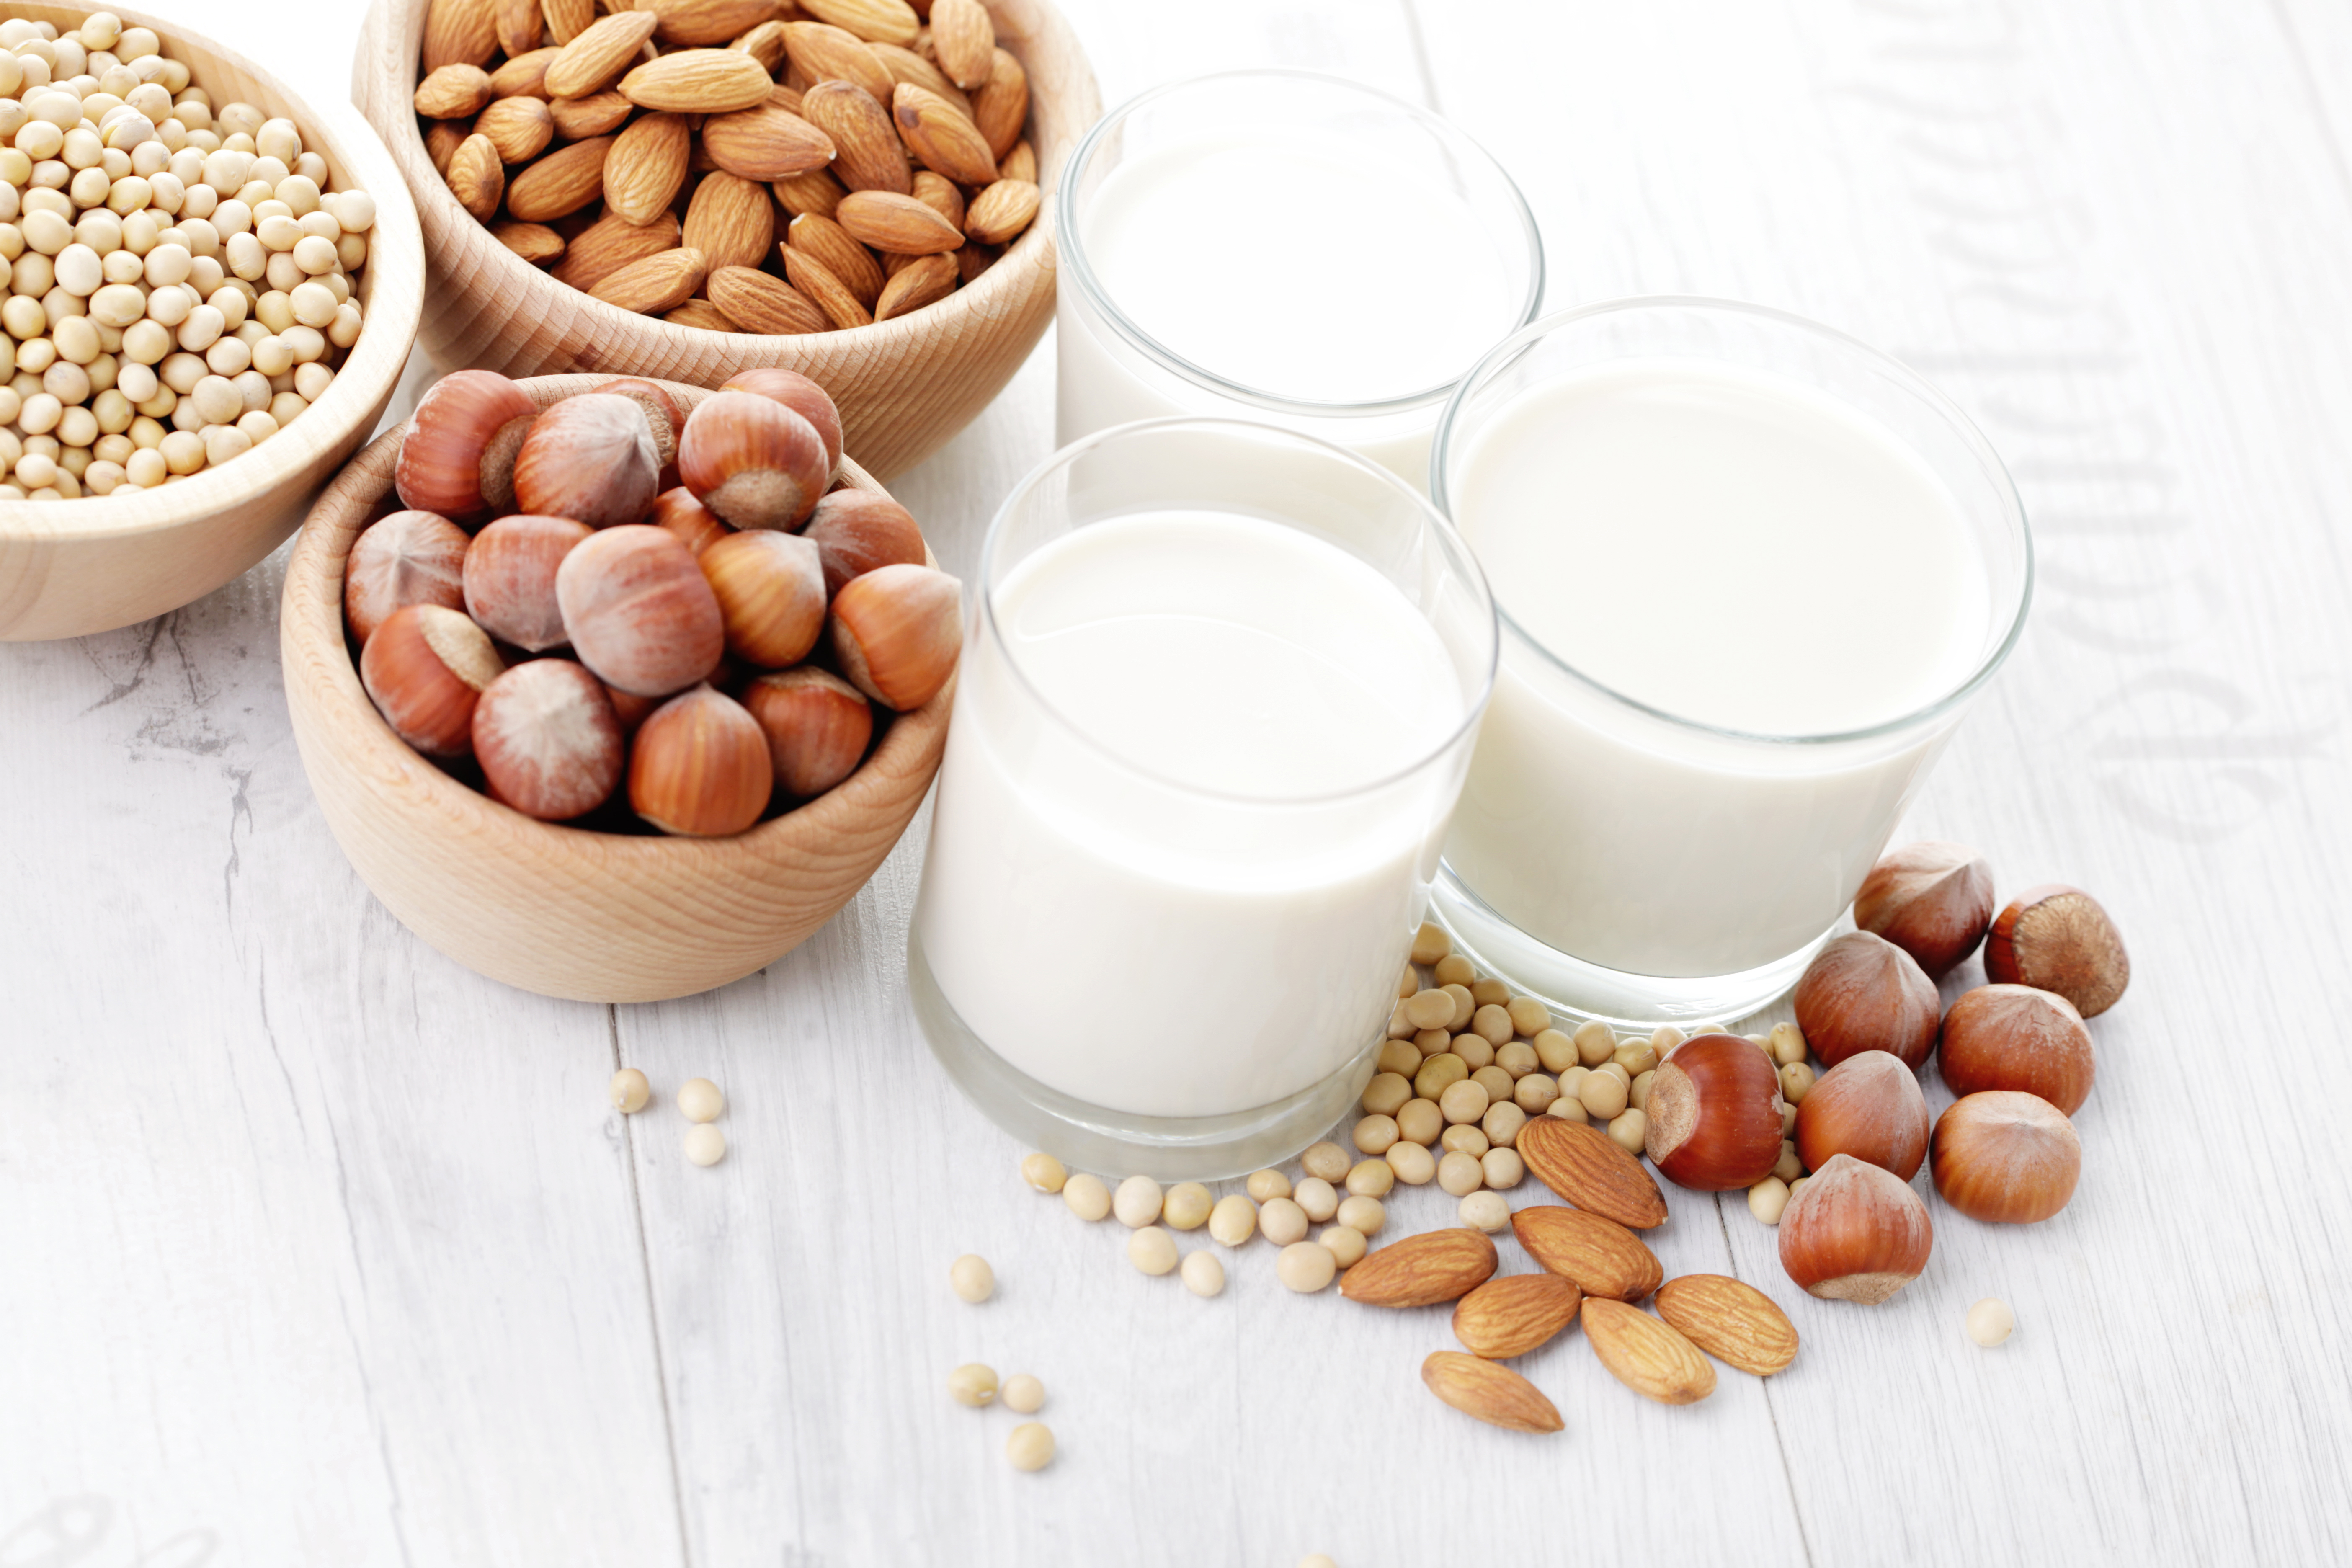 Mayo Clinic Q and A: Dairy milk, soy milk, almond milk - which is the  healthiest choice for you? - Mayo Clinic News Network